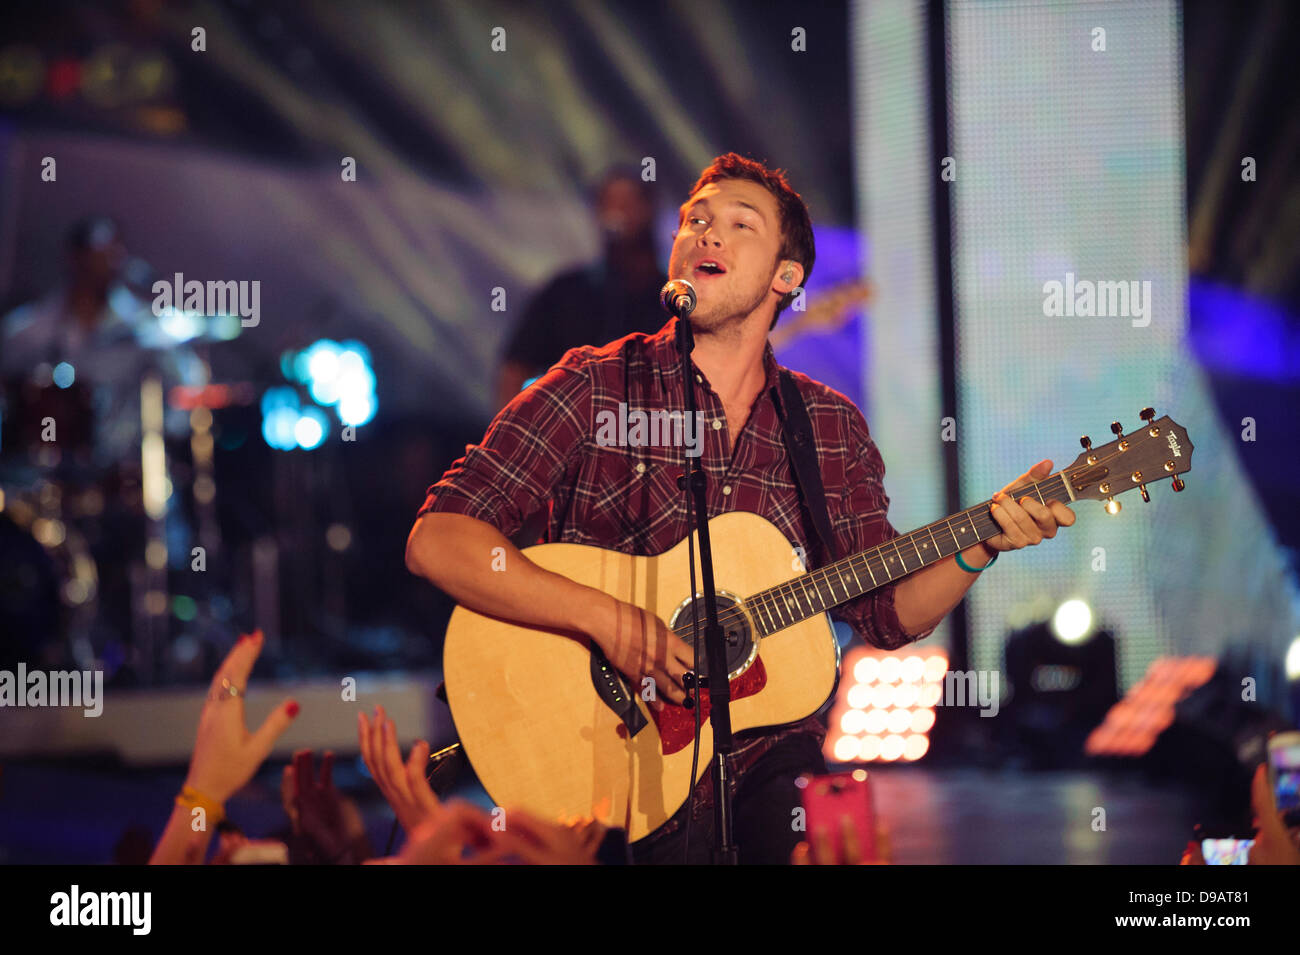 Toronto, Canada. 16th June, 2013. Phillip Phillips performs at the 2013 MMVA in Toronto Canada. The MuchMusic Video Awards took over the trendy Queen West village in Toronto for an award show featuring PSY and other super stars including Avril Lavigne, Demi Lovato, Serena Ryder, Ed Sheeran, Marianas Trench, Classified, and Armin Van Buuren with Trevor Guthrie. Credit:  Victor Biro/Alamy Live News Stock Photo